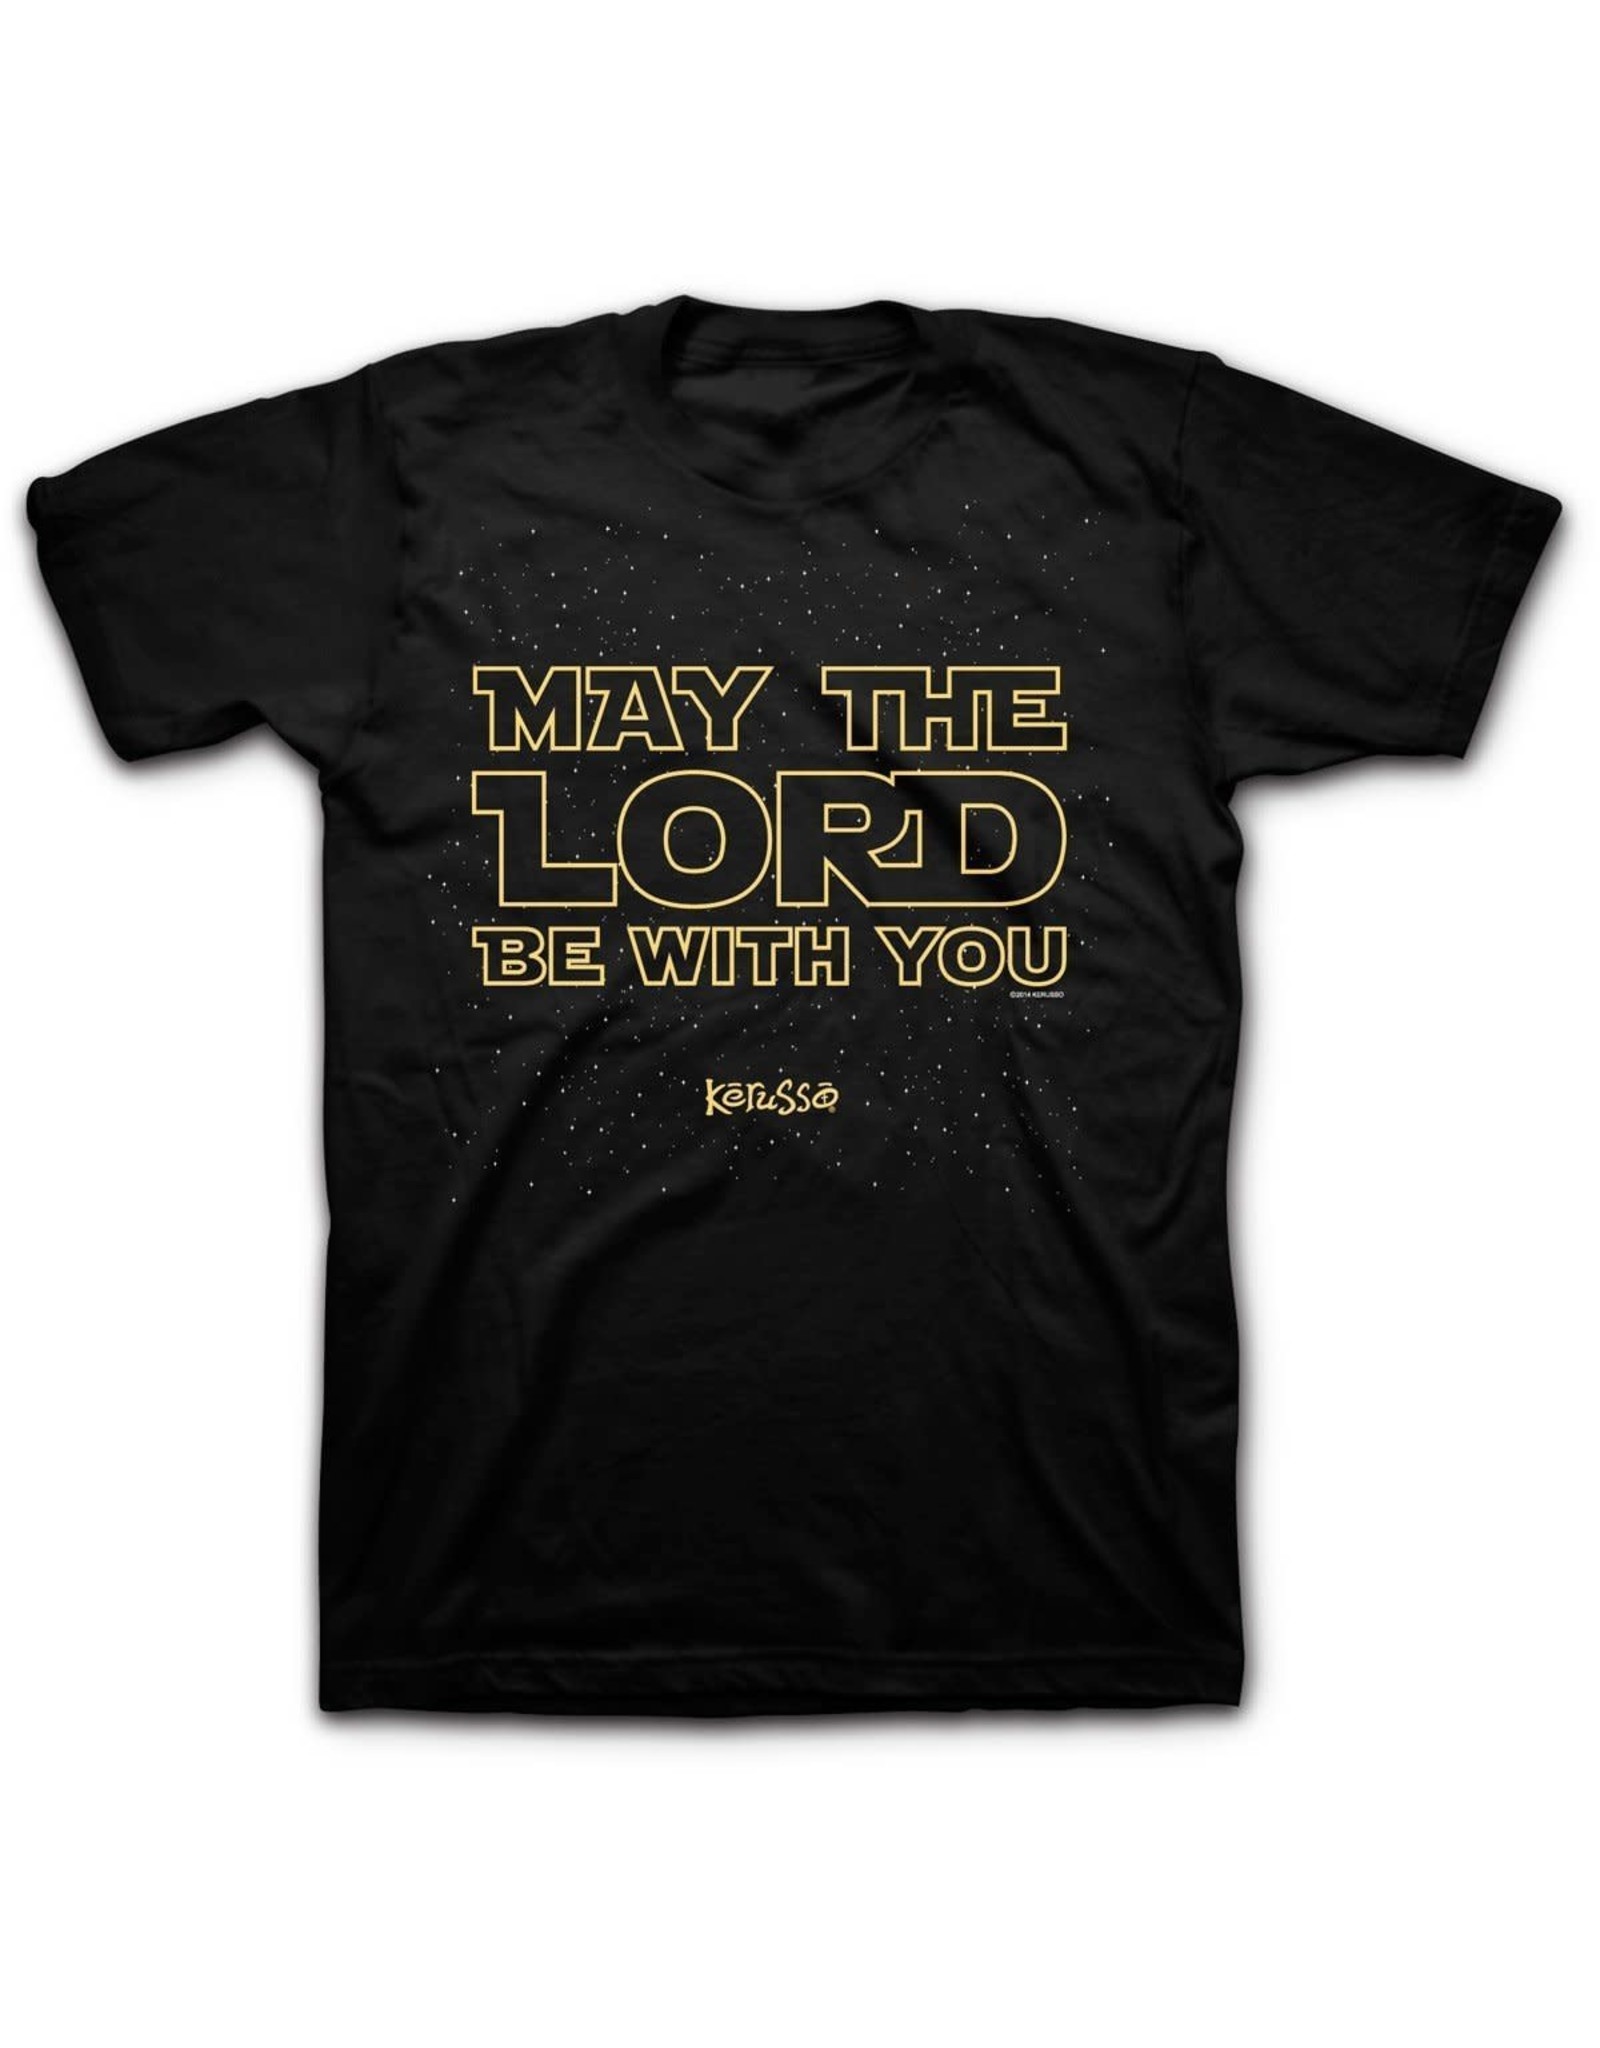 Kerusso Adult Shirt - May the Lord be with You